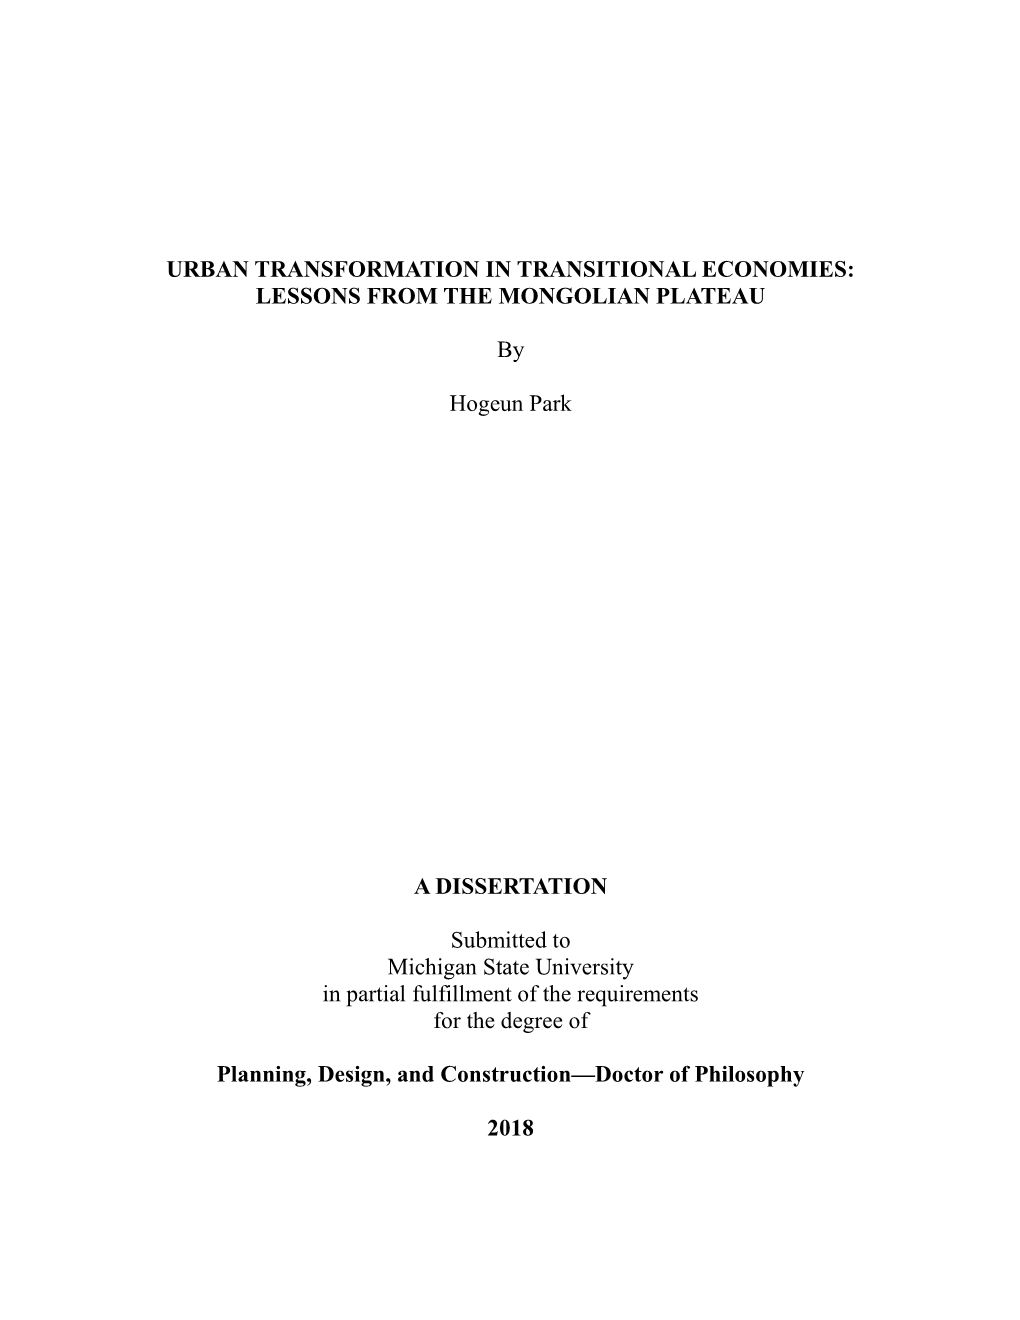 Urban Transformation in Transitional Economies: Lessons from the Mongolian Plateau